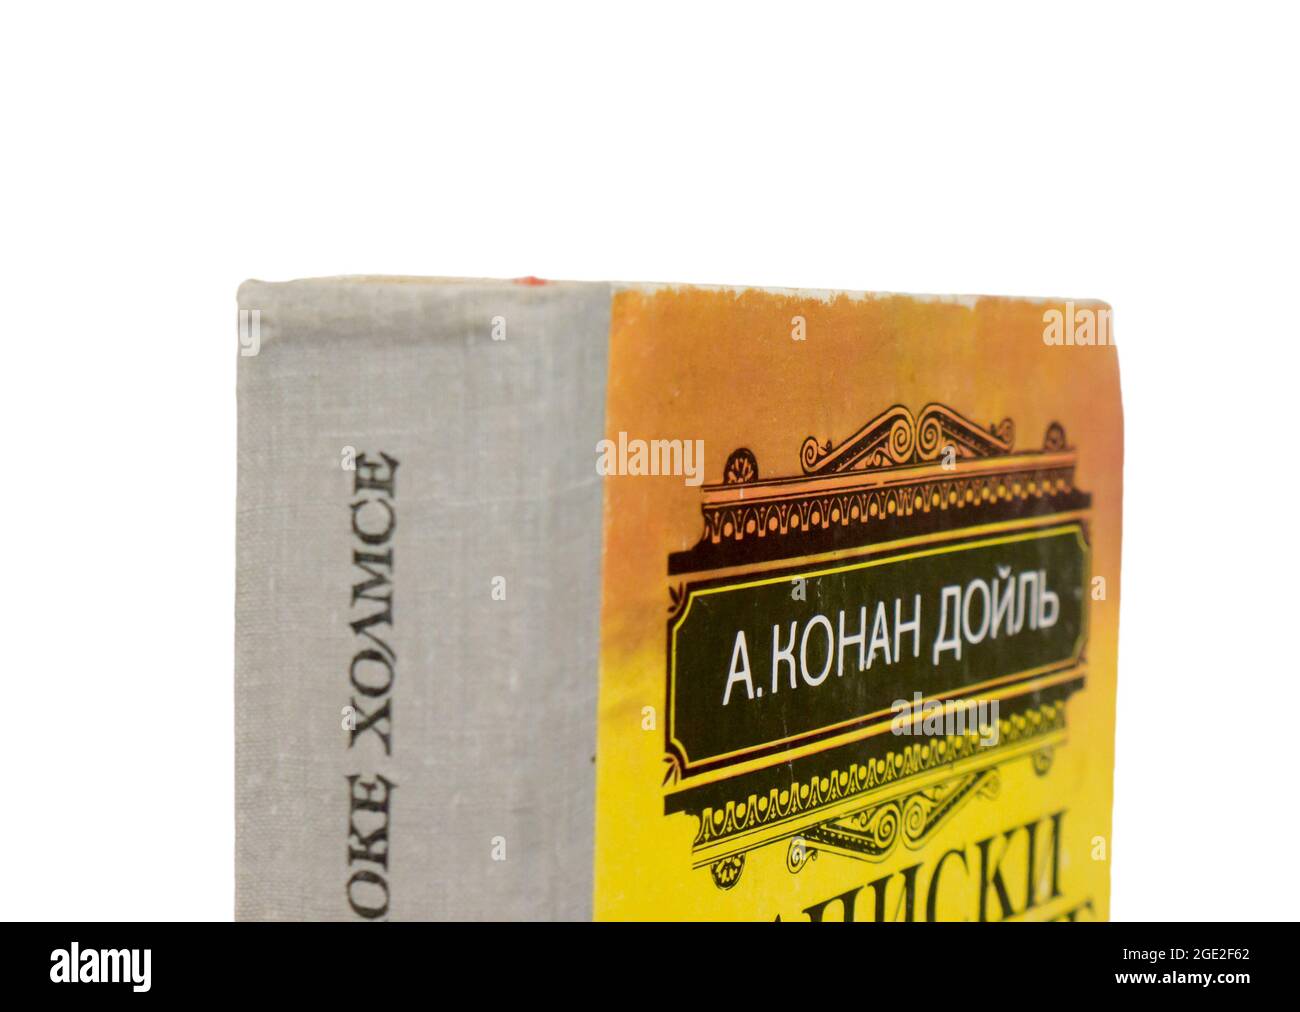 The 'The Memoirs of Sherlock Holmes' by Arthur Conan Doyle, published in 1981, in USSR. Stock Photo